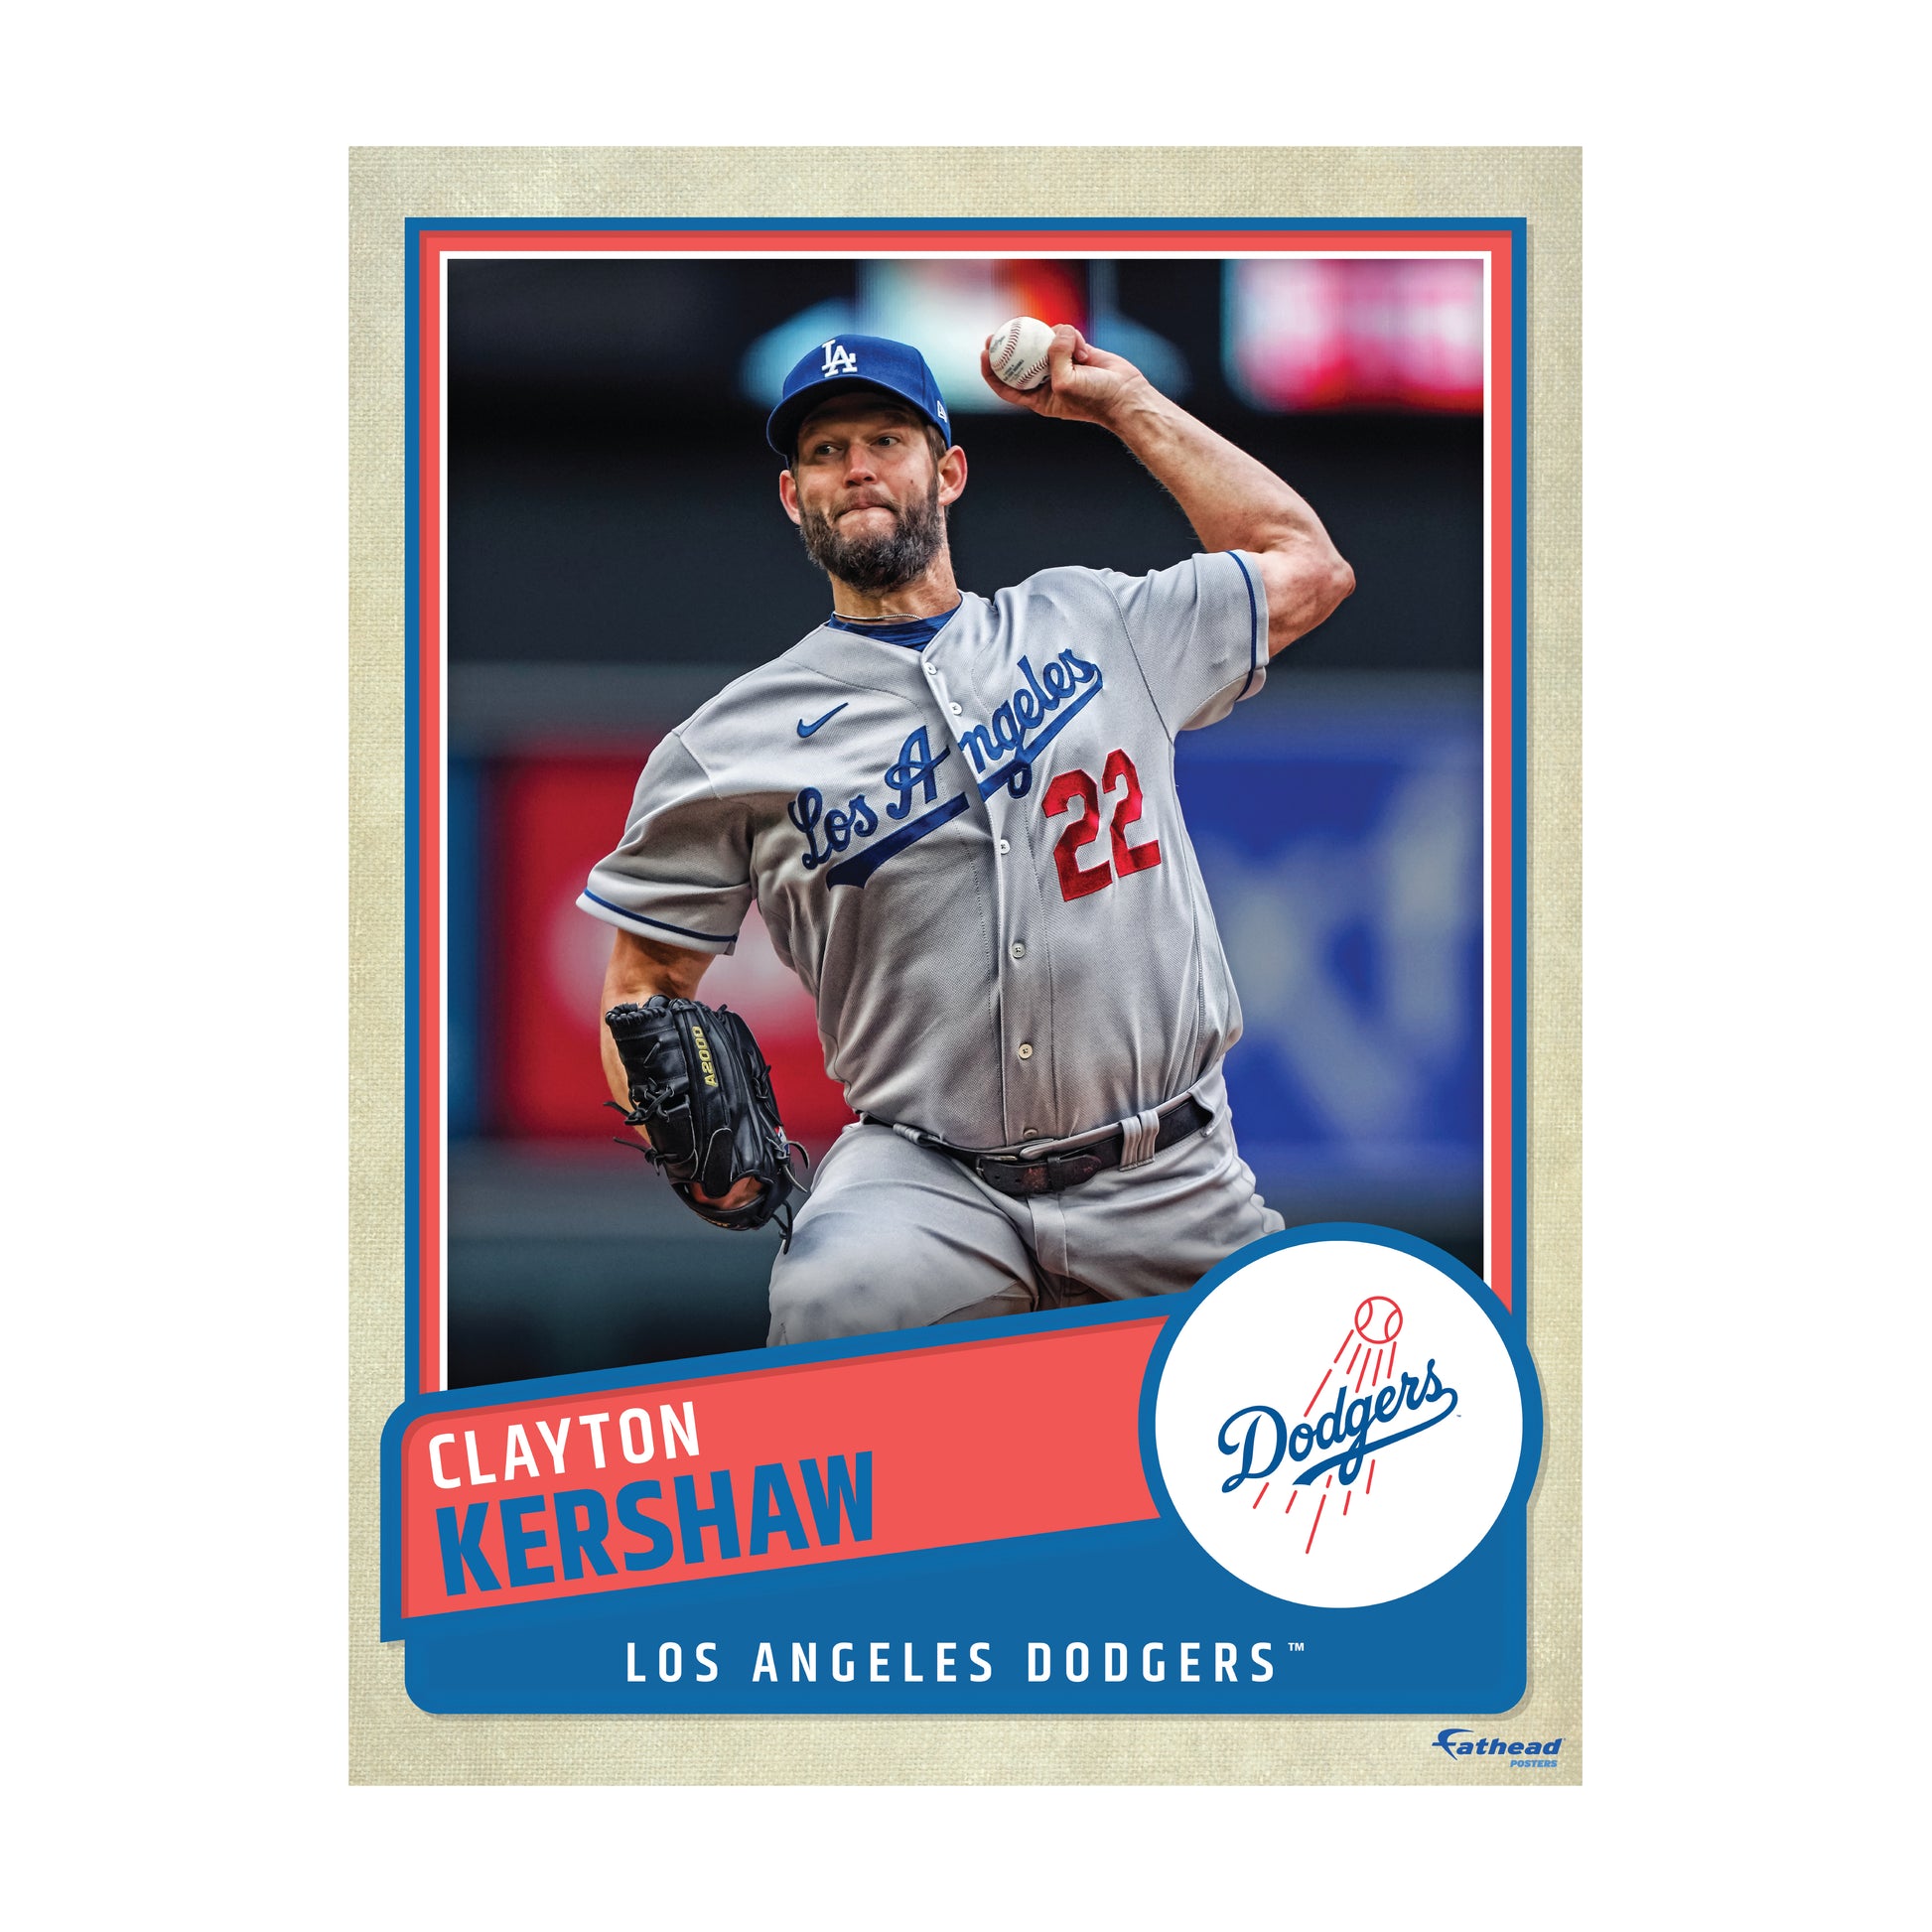 Clayton Kershaw - Officially Licensed MLB Removable Wall Decal